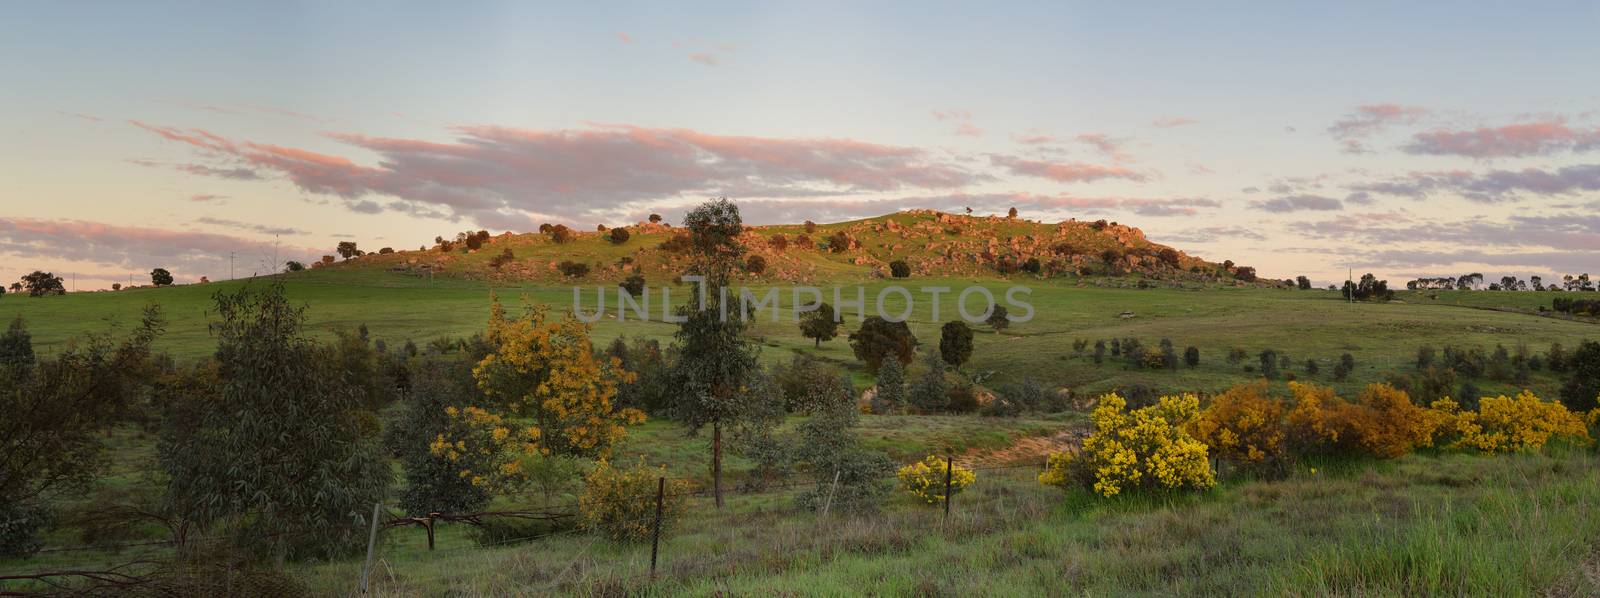 First rays of warm light highlight the hills at Wyangala in Central West NSW Australia